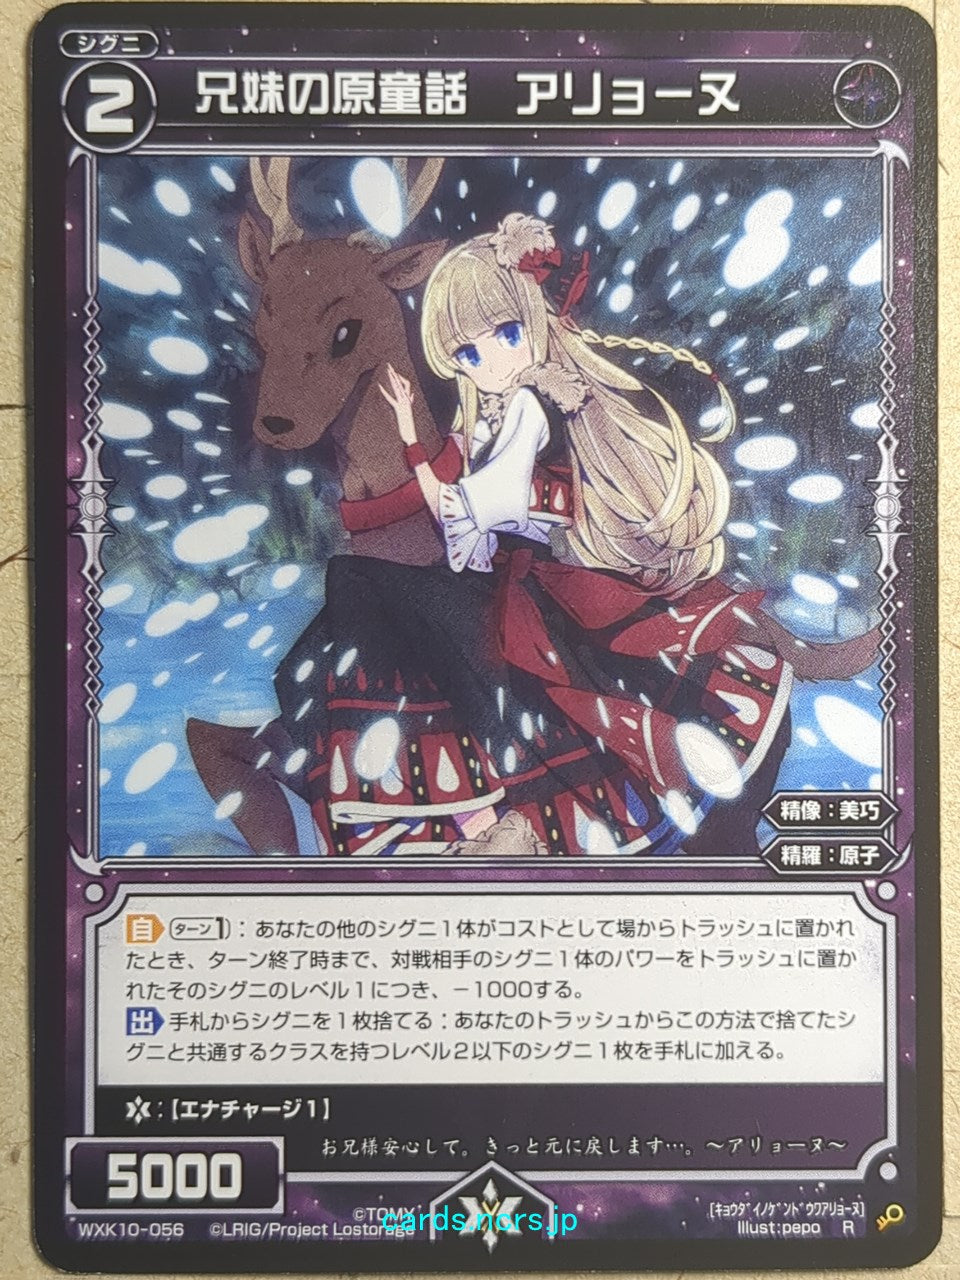 Wixoss Black Wixoss -Alyonu-  Element Fairy Tale of the Brother and Sister Trading Card WXK10-056